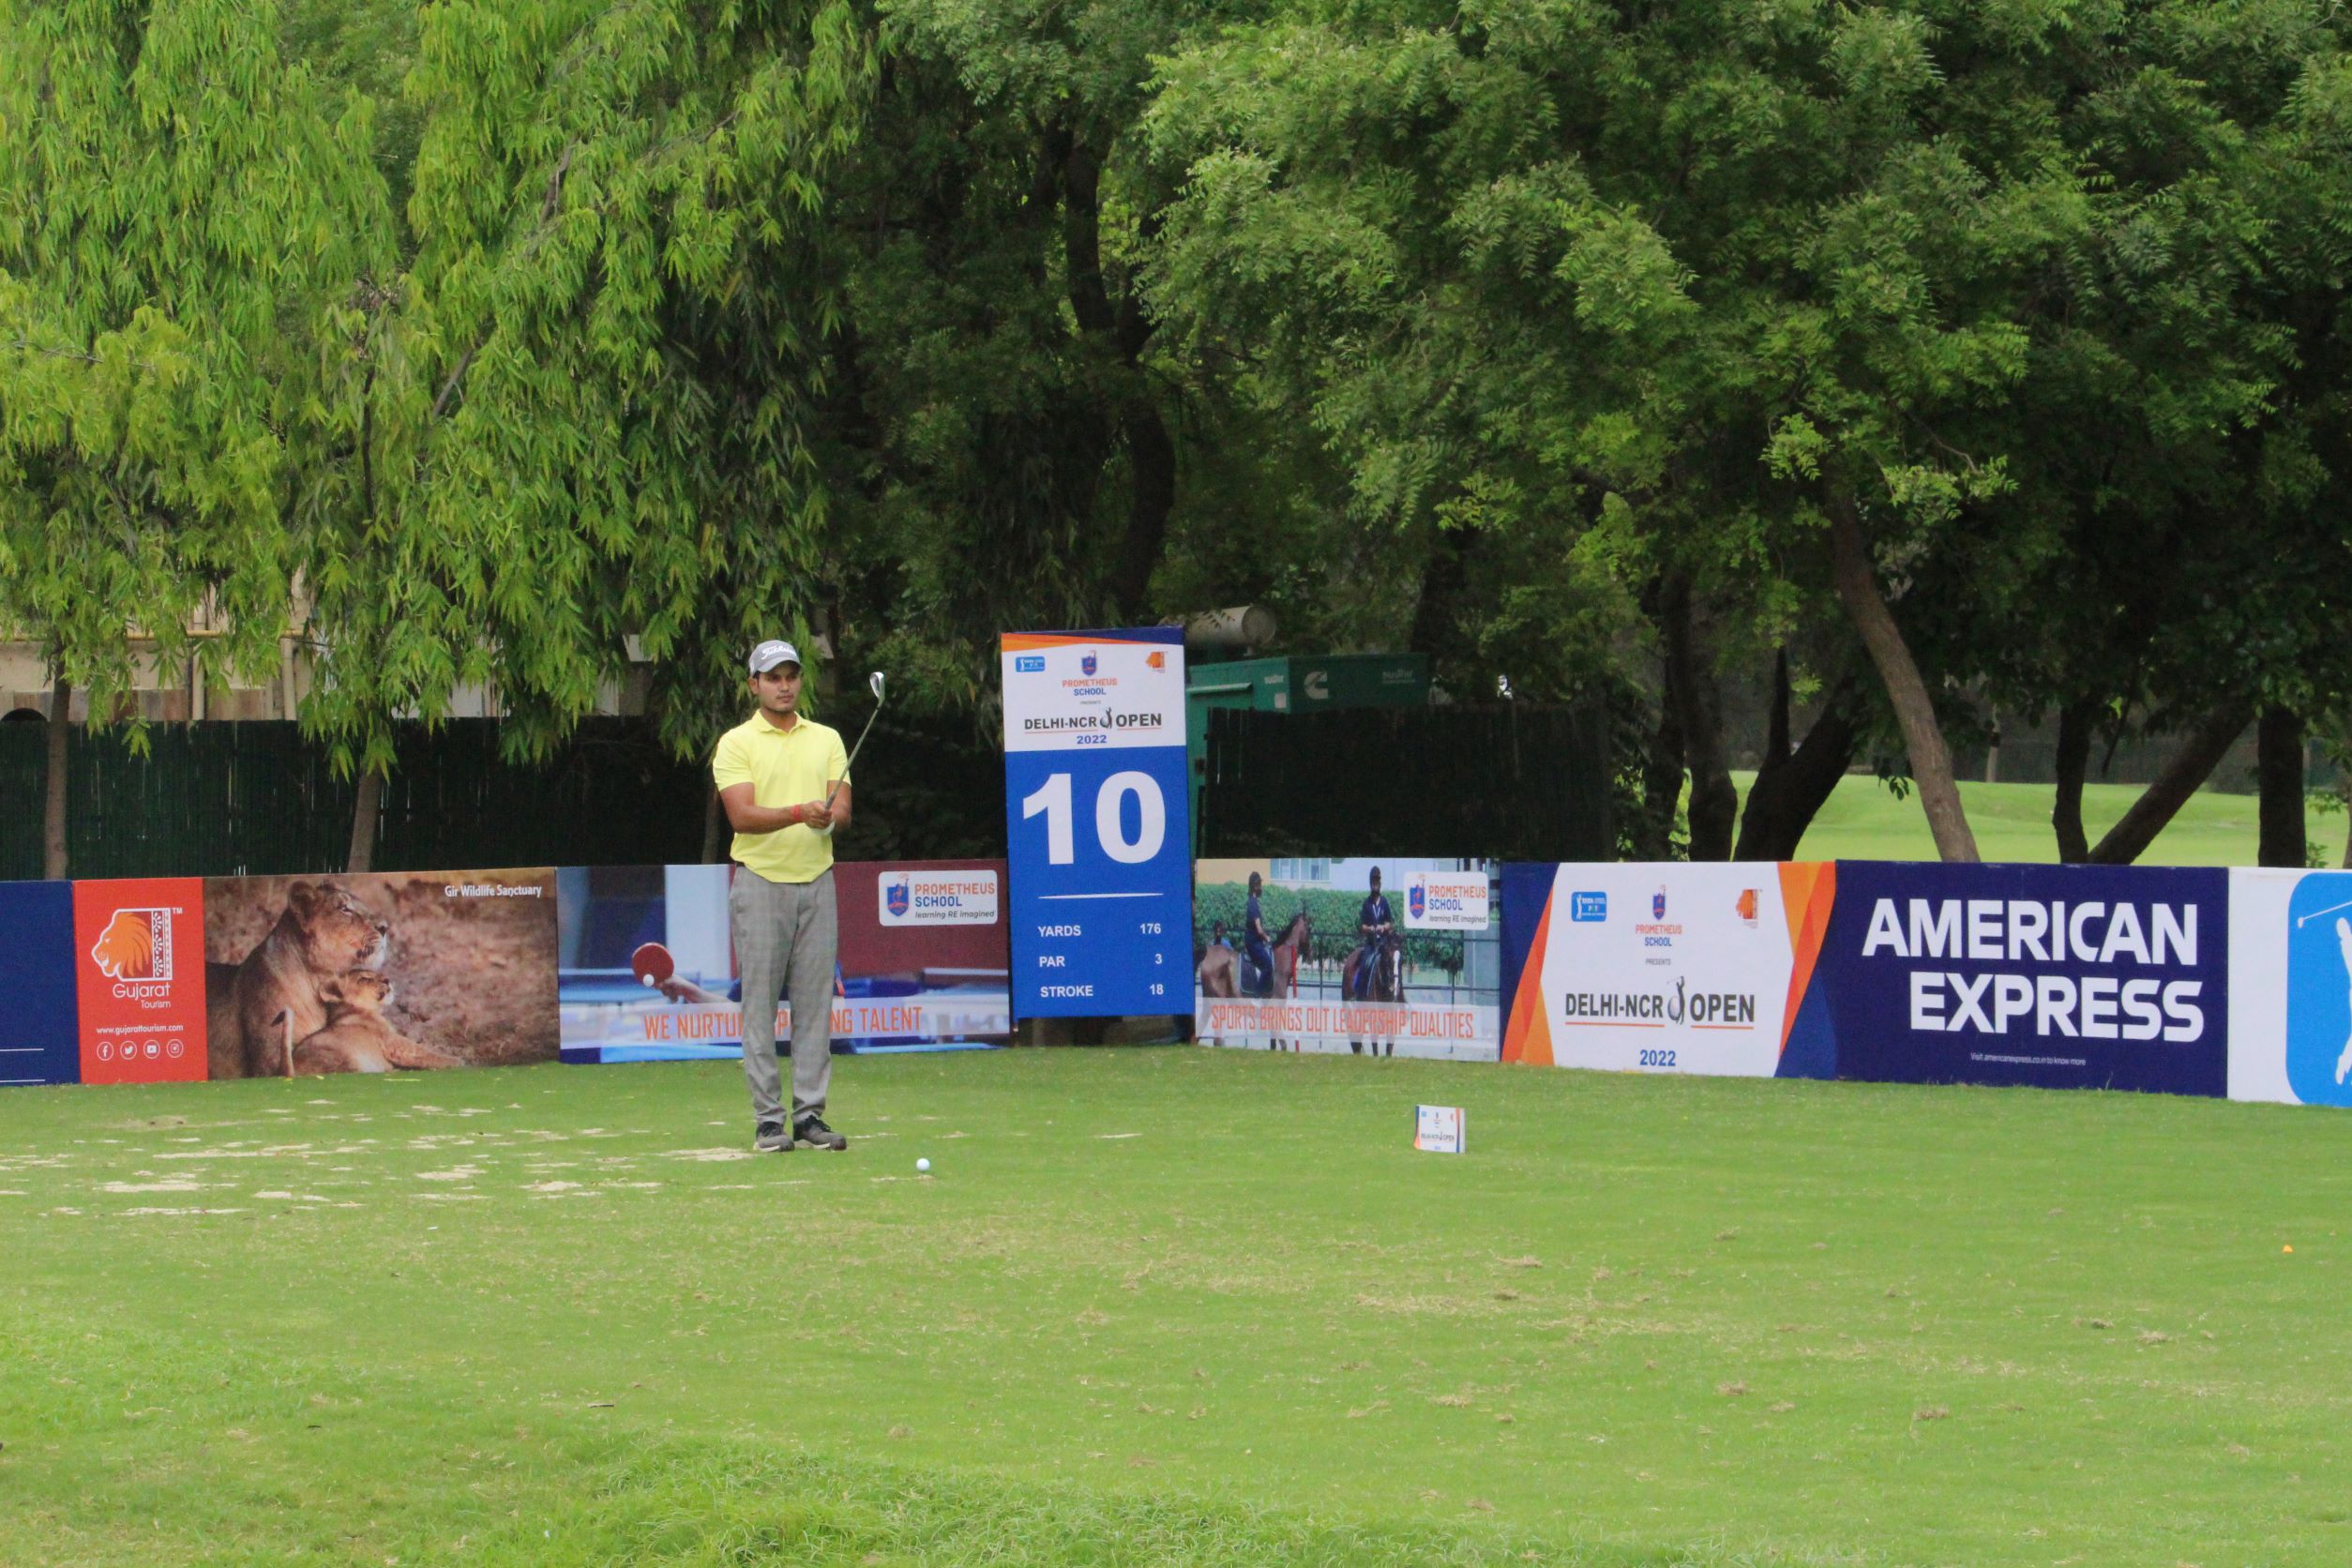  Delhi-NCR Open 2022: Manu and Amardeep tied for the lead